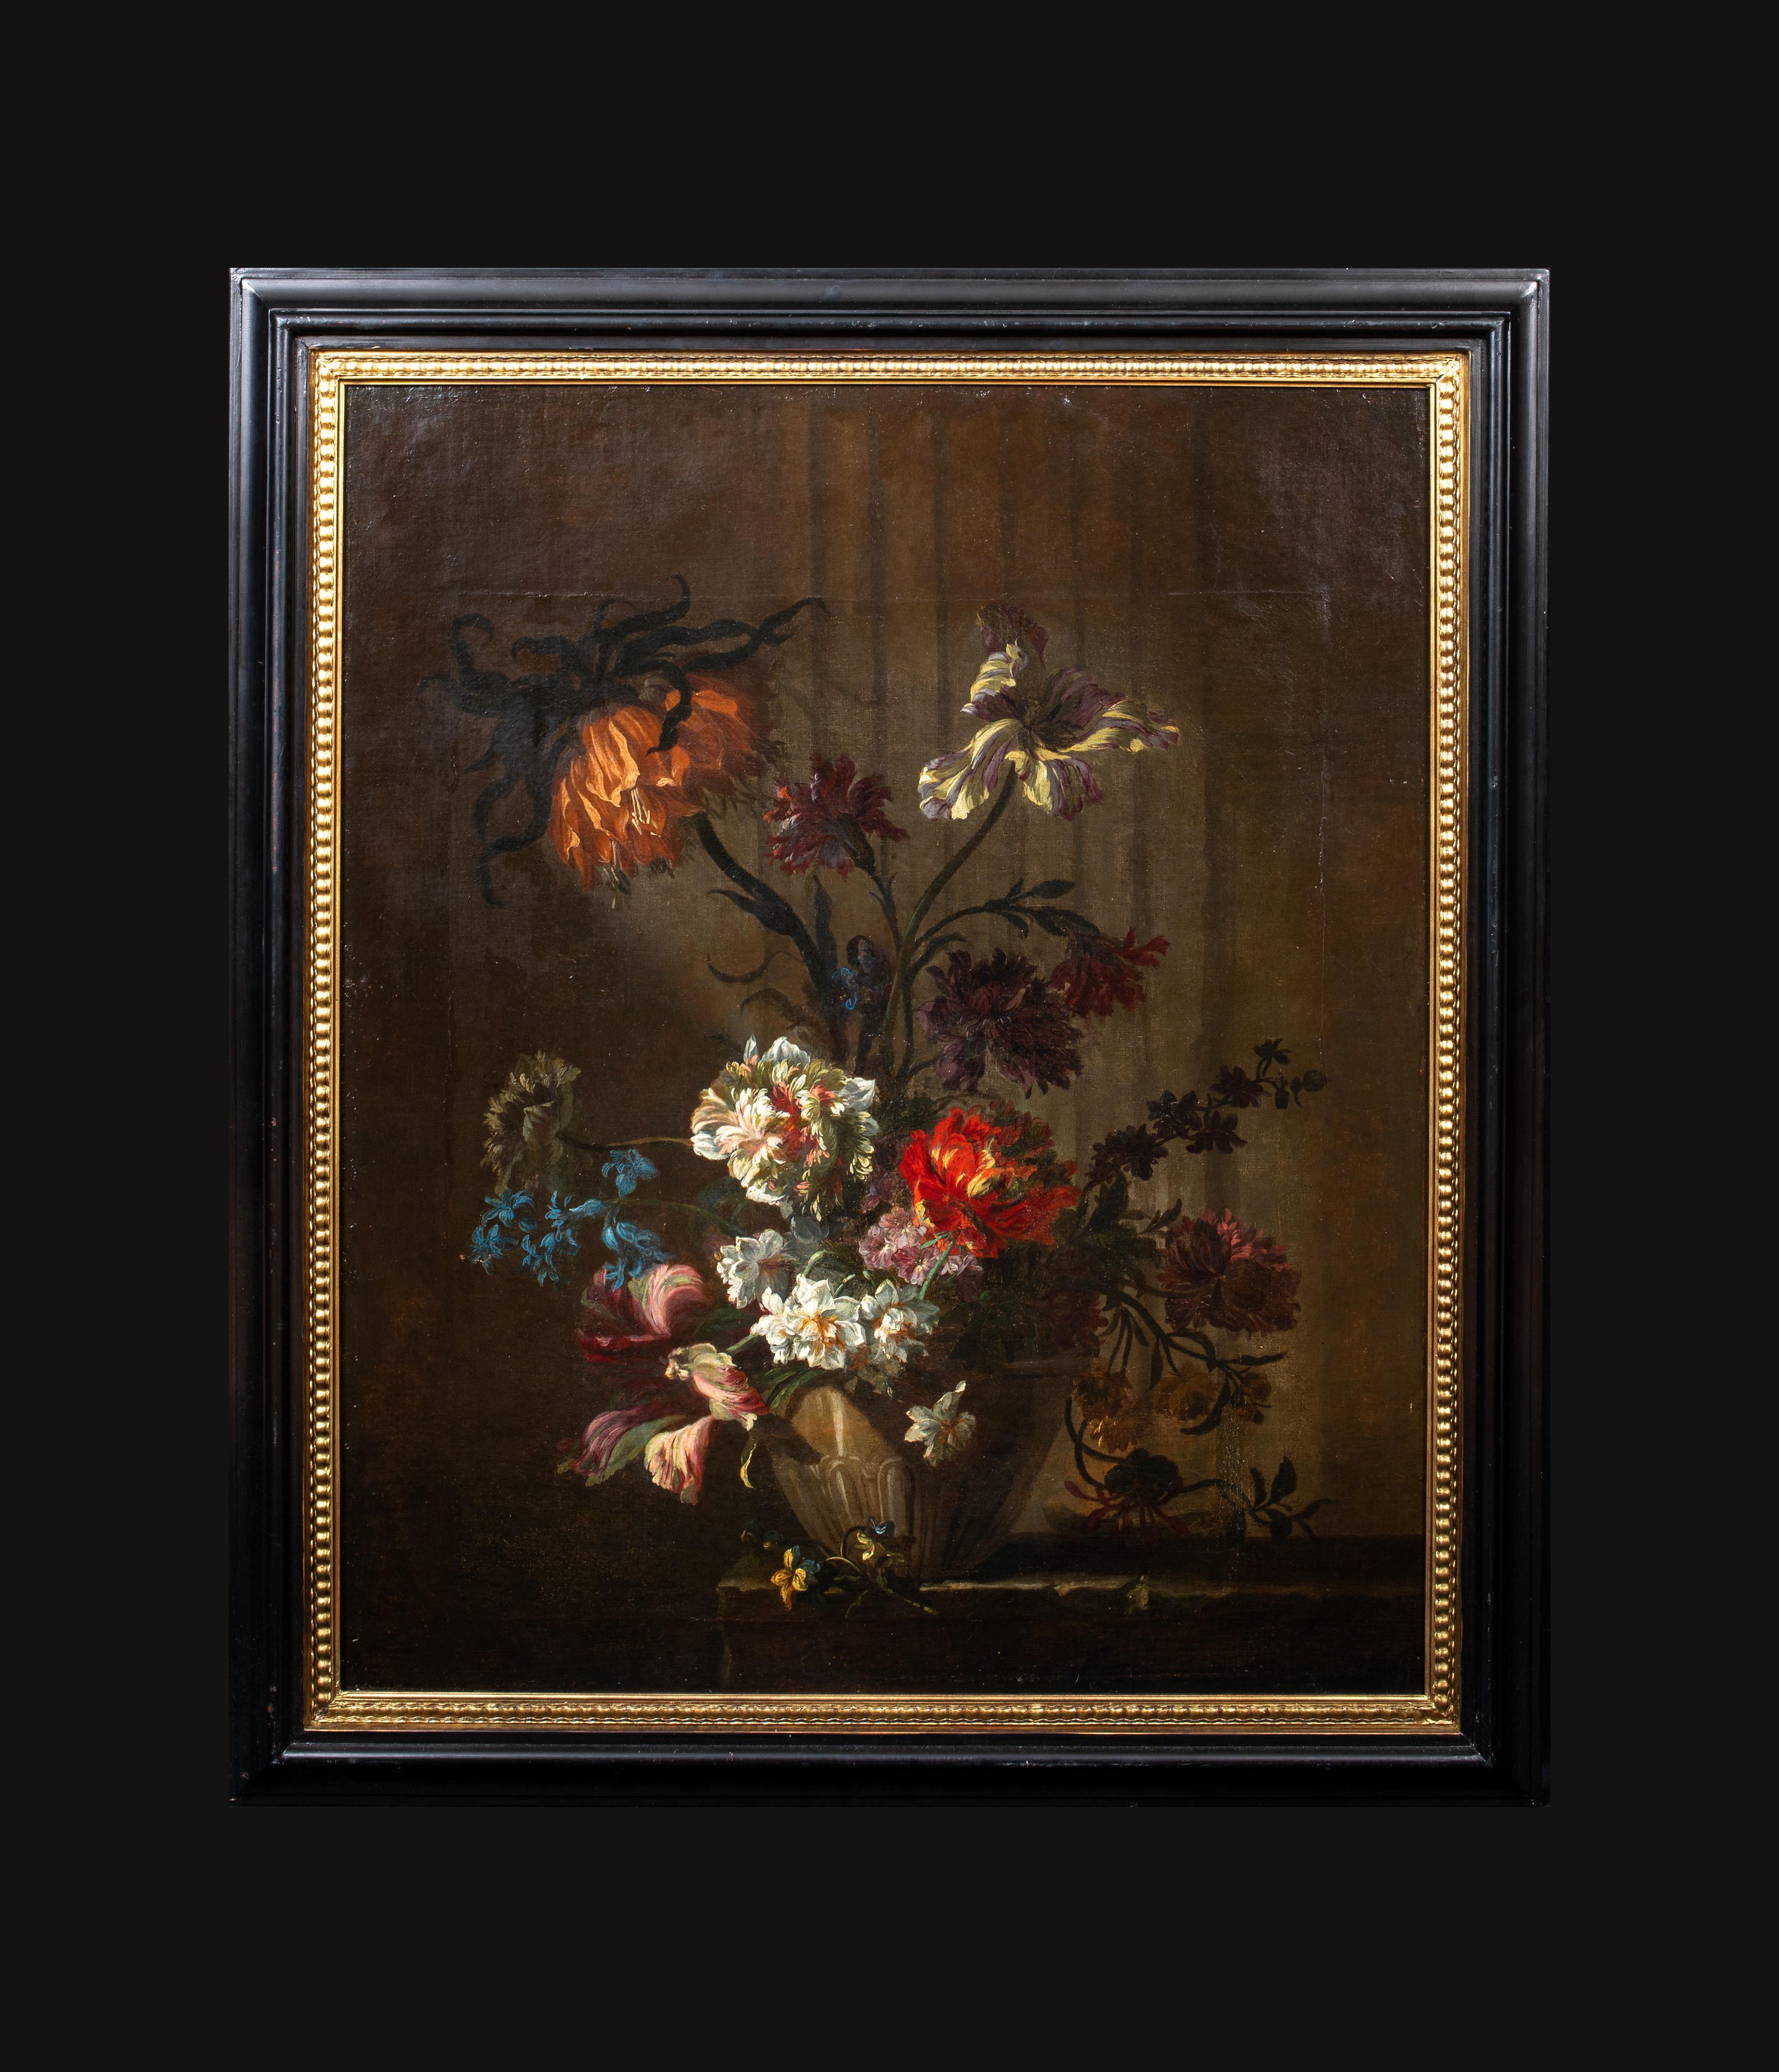 Still Life Of Flowers In A Vase, 17th Century  - Painting by Jean-Baptiste Monnoyer